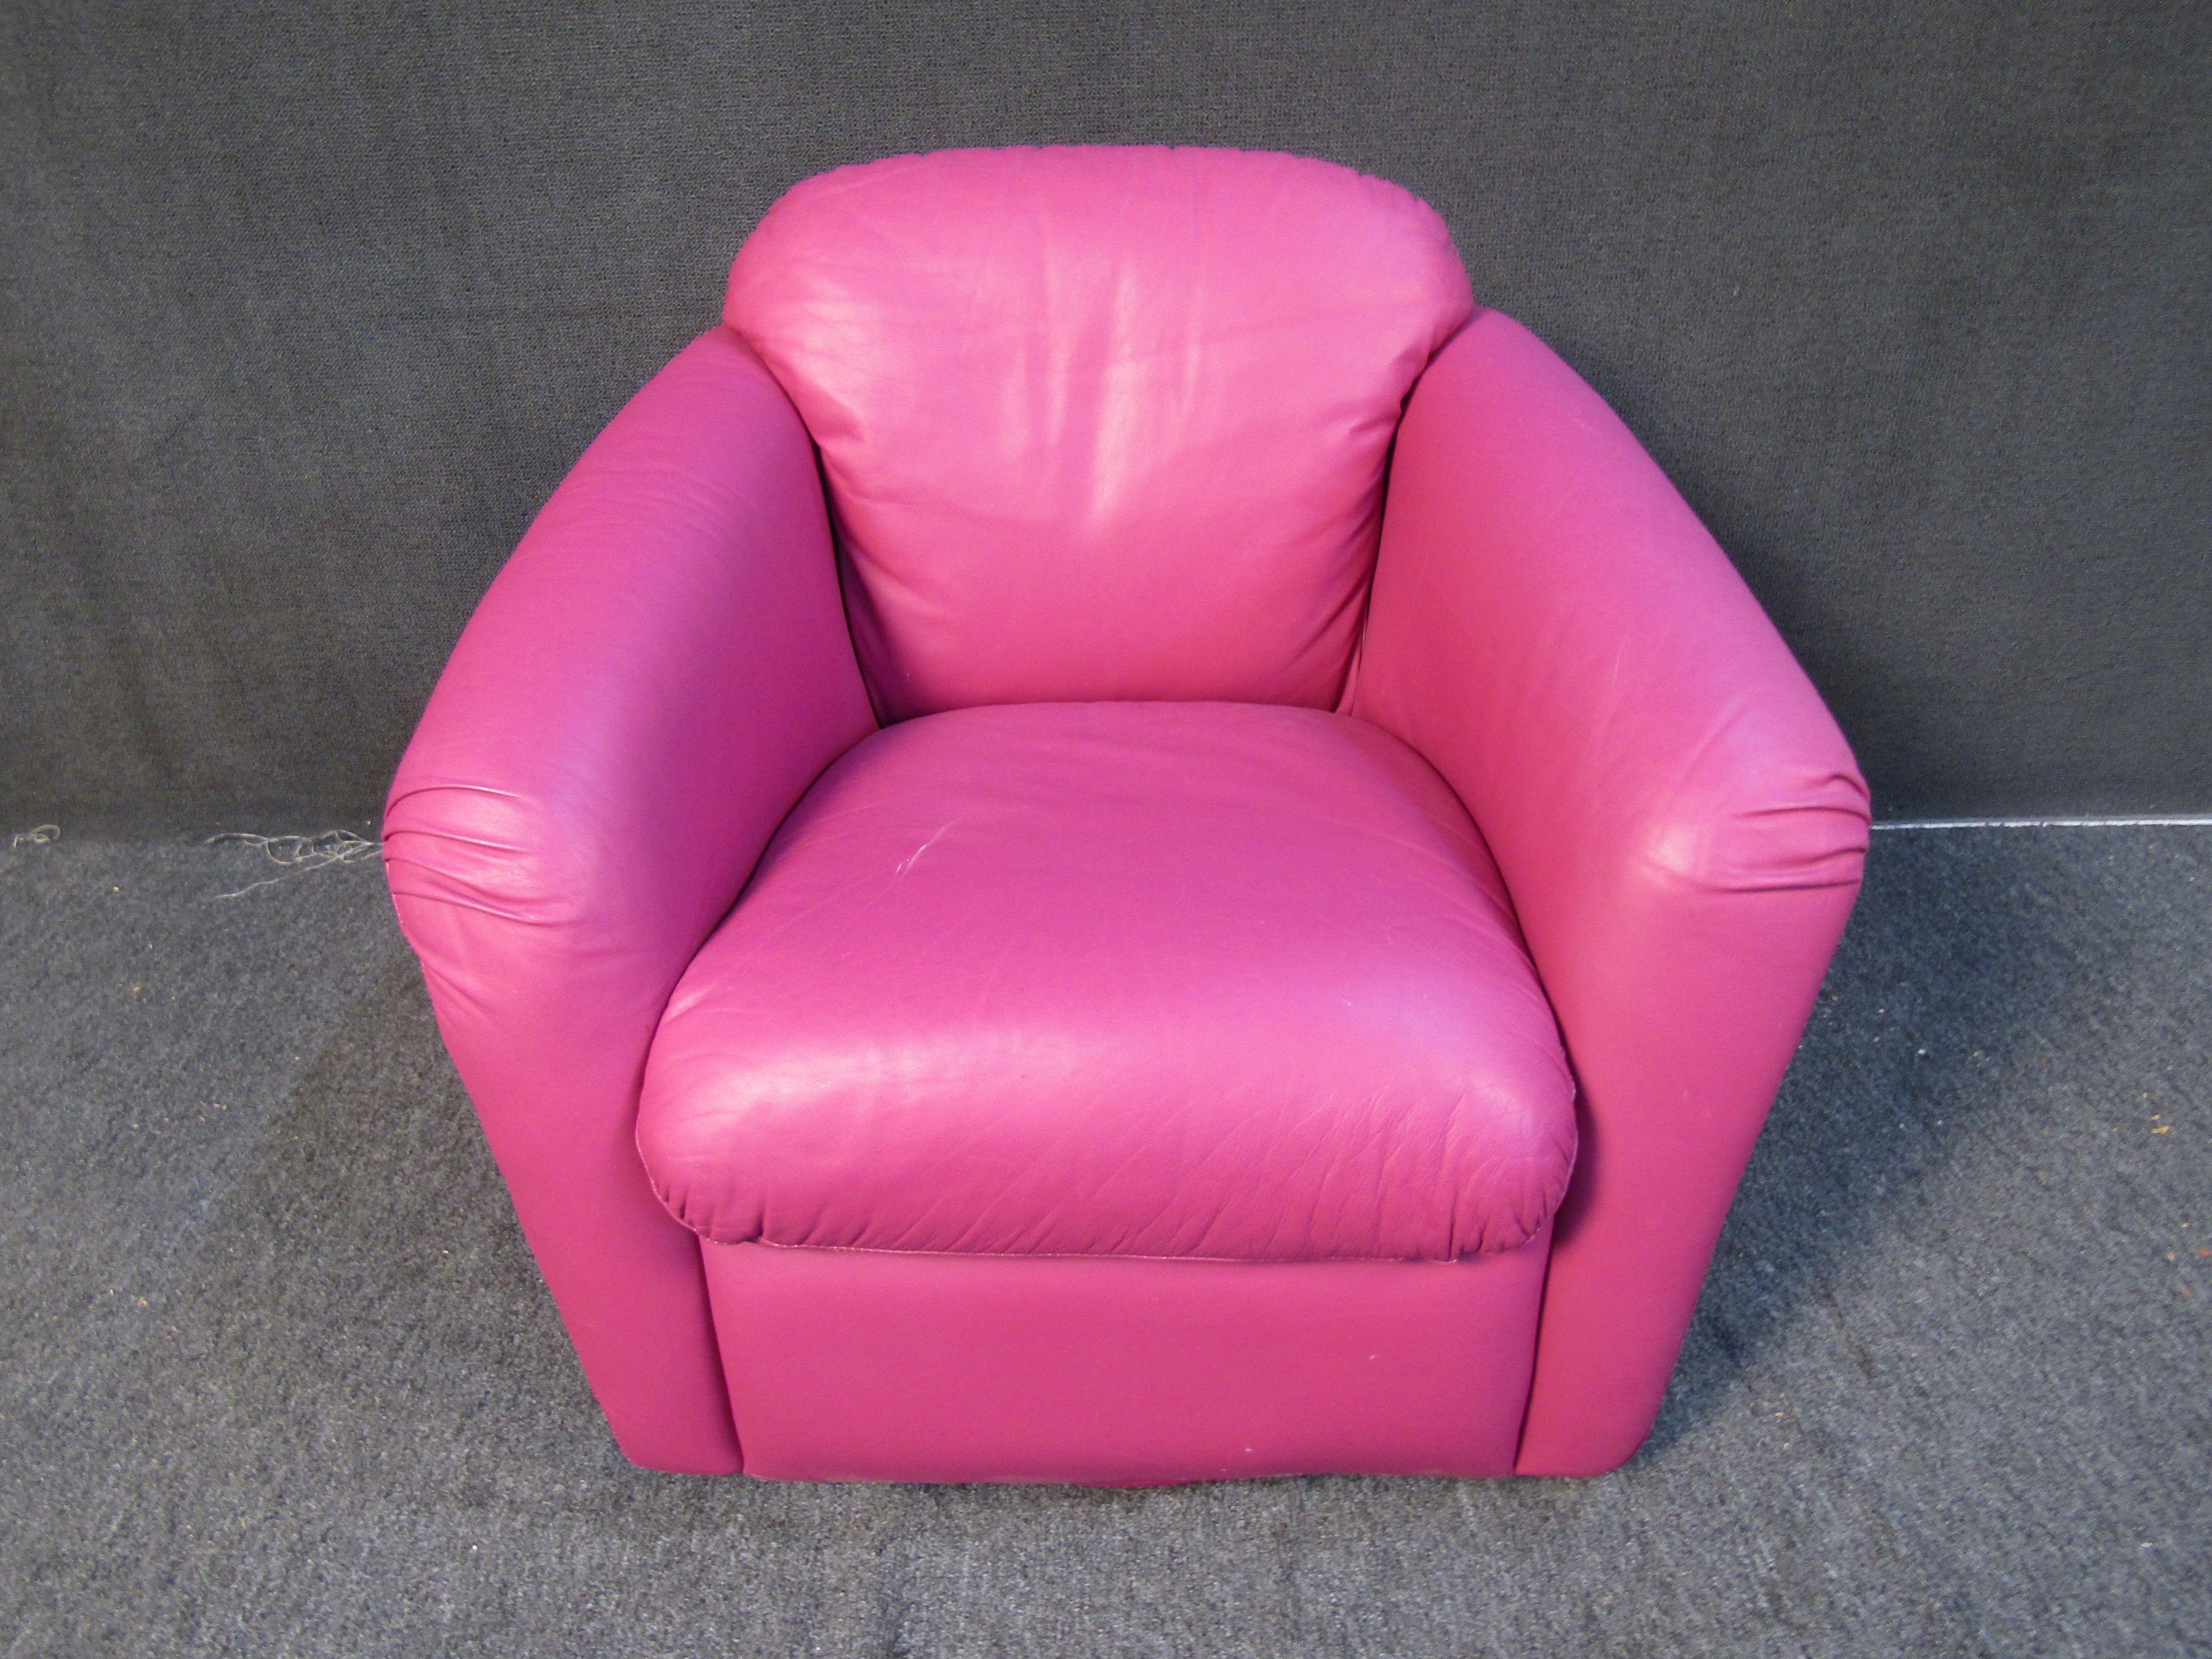 Colorful and plush pink mid-century leather lounge chair with a swivel base. Please confirm item location with seller (NY/NJ).